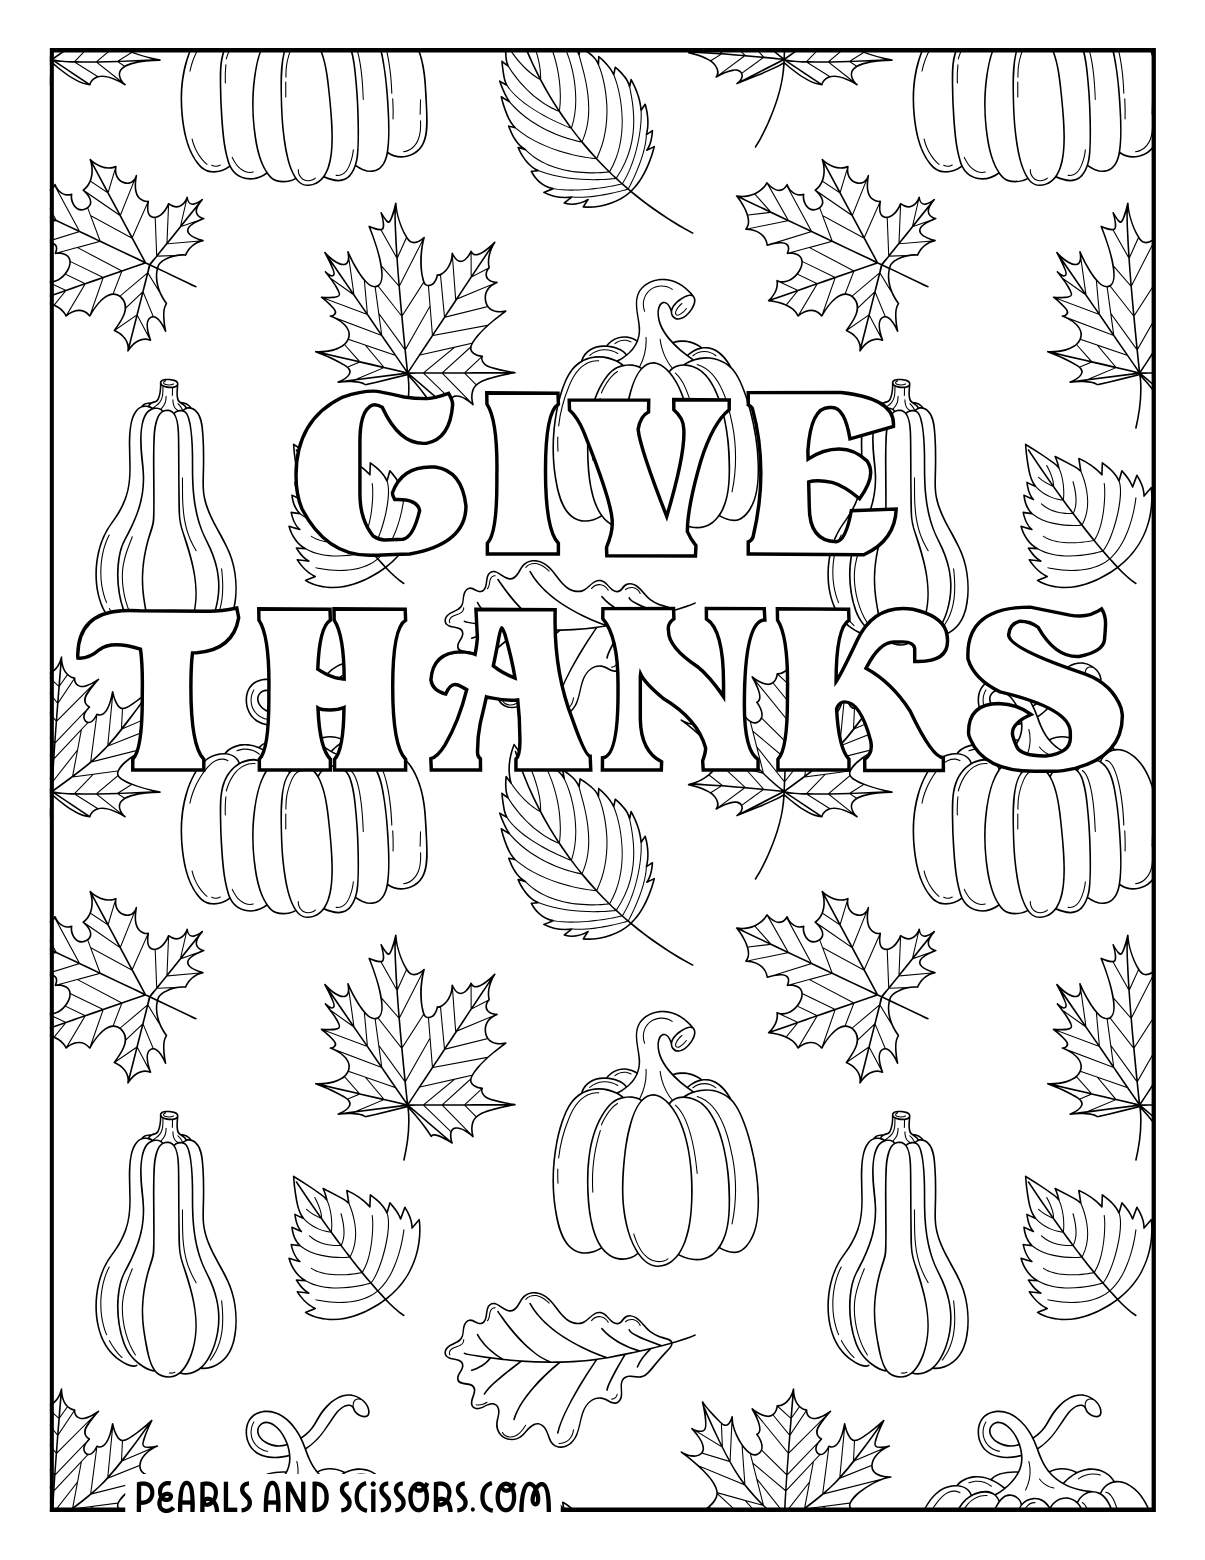 Give thanks coloring page for adults.